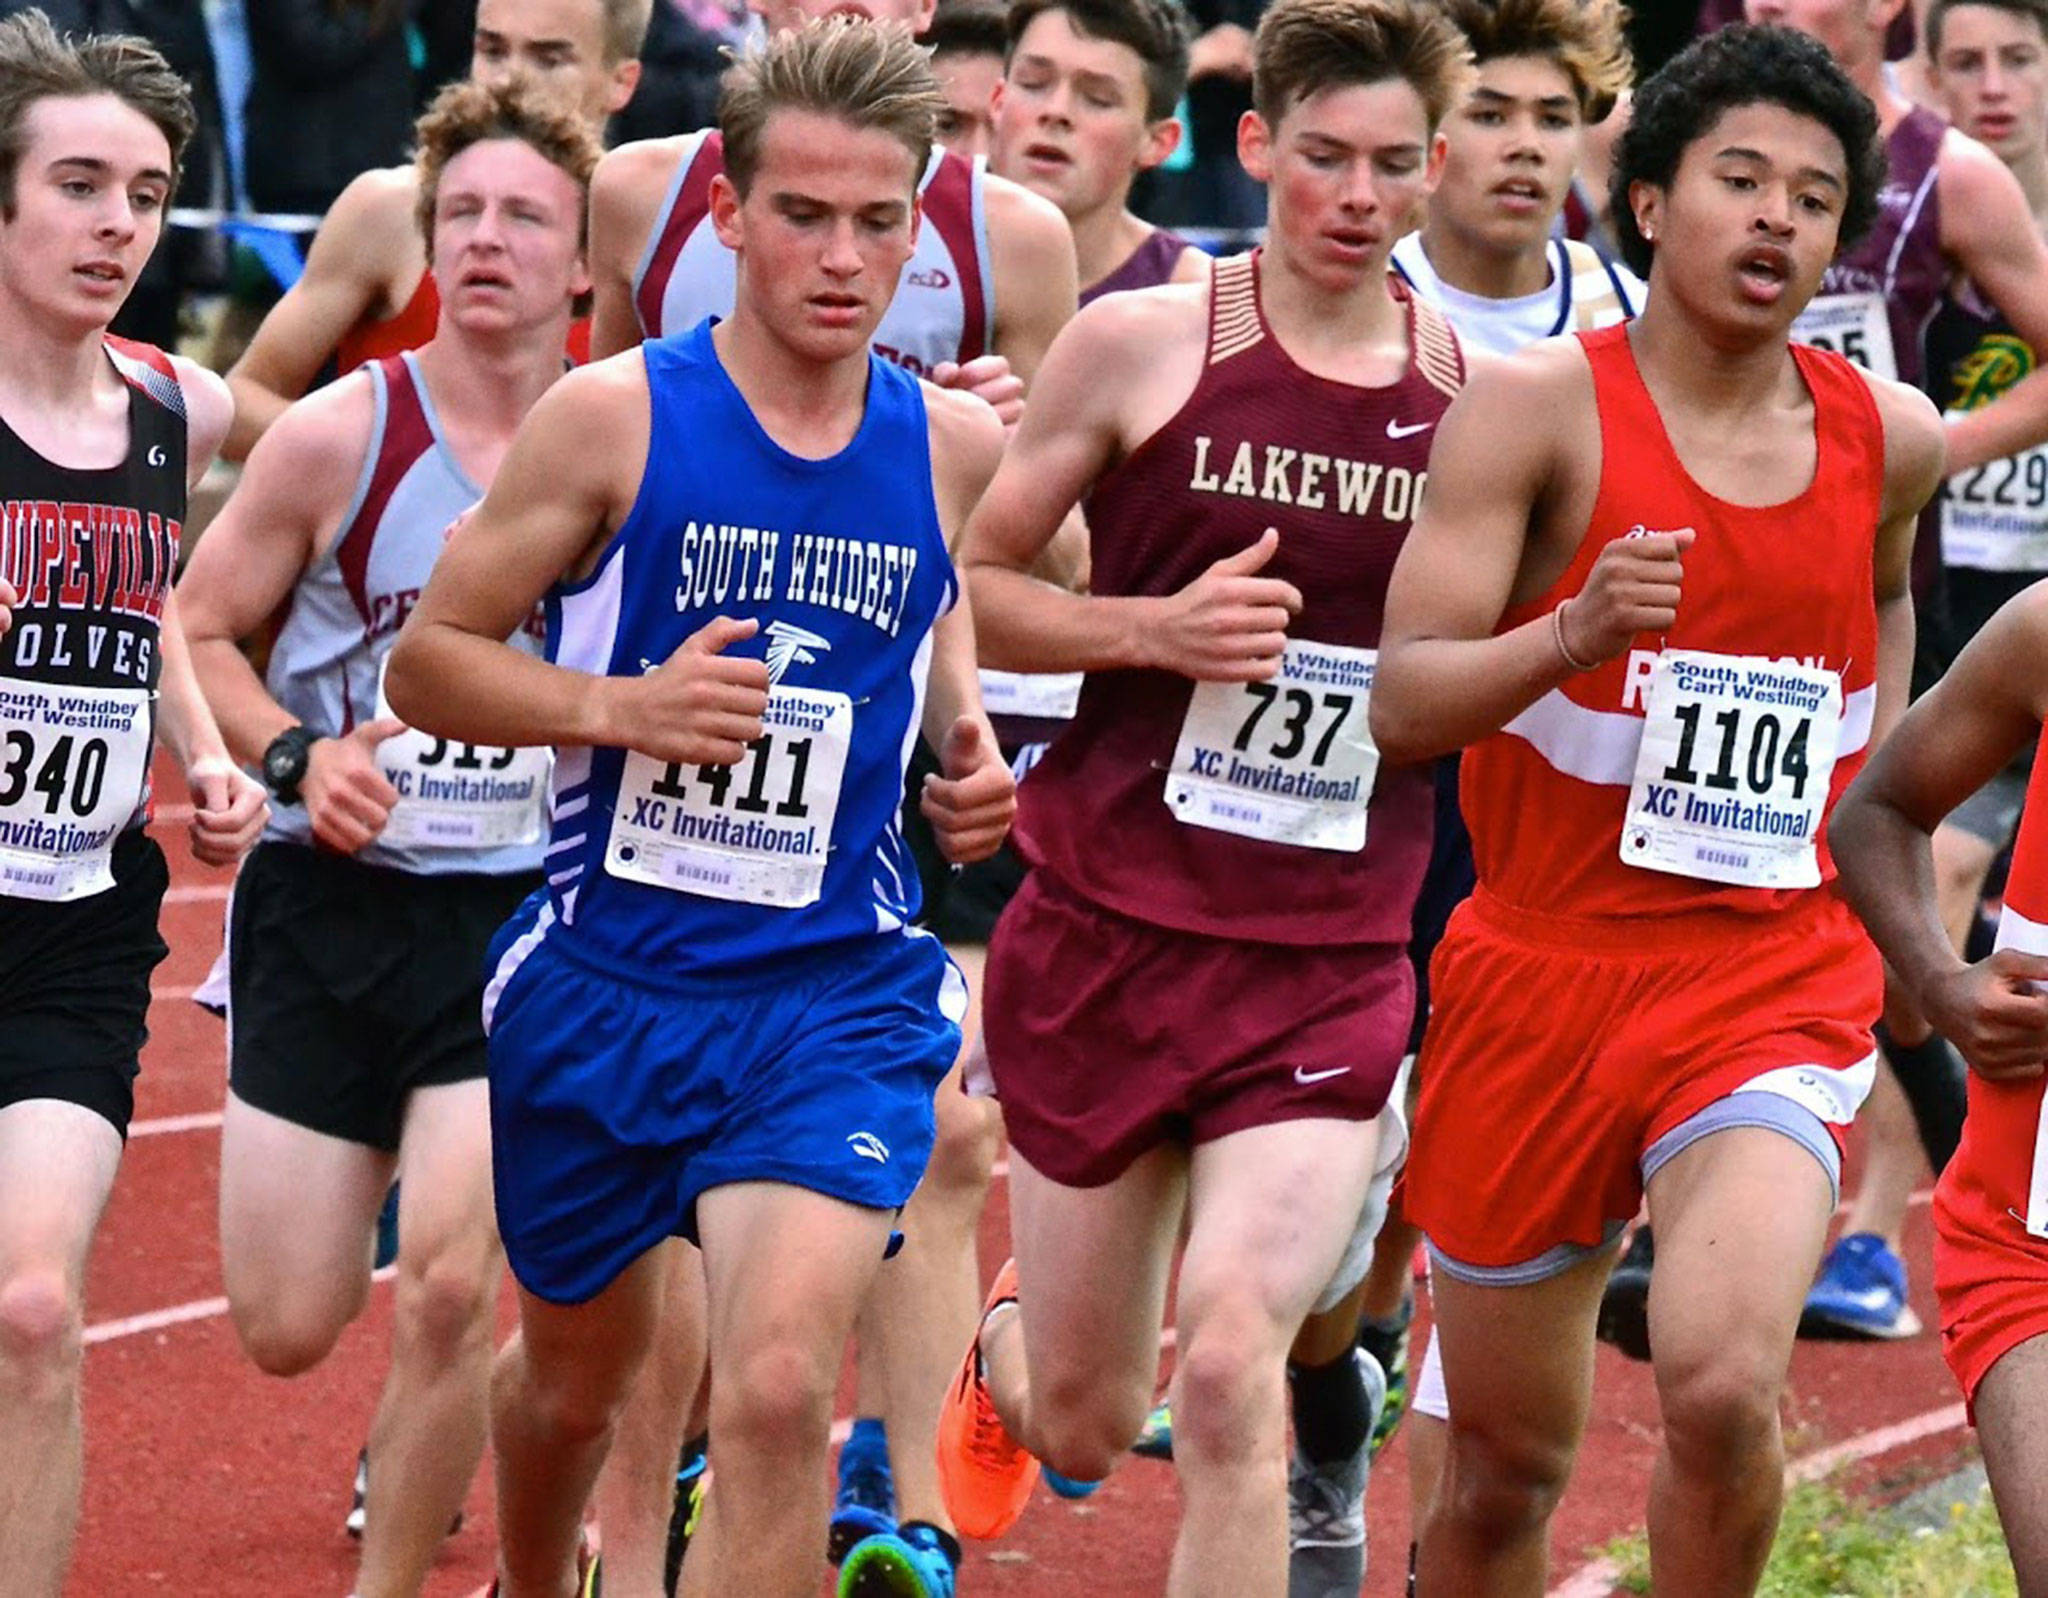 South Whidbey’s Michael Cepowski (1411) runs with the pack during Saturday’s meet. (Photo by Karen Swegler)